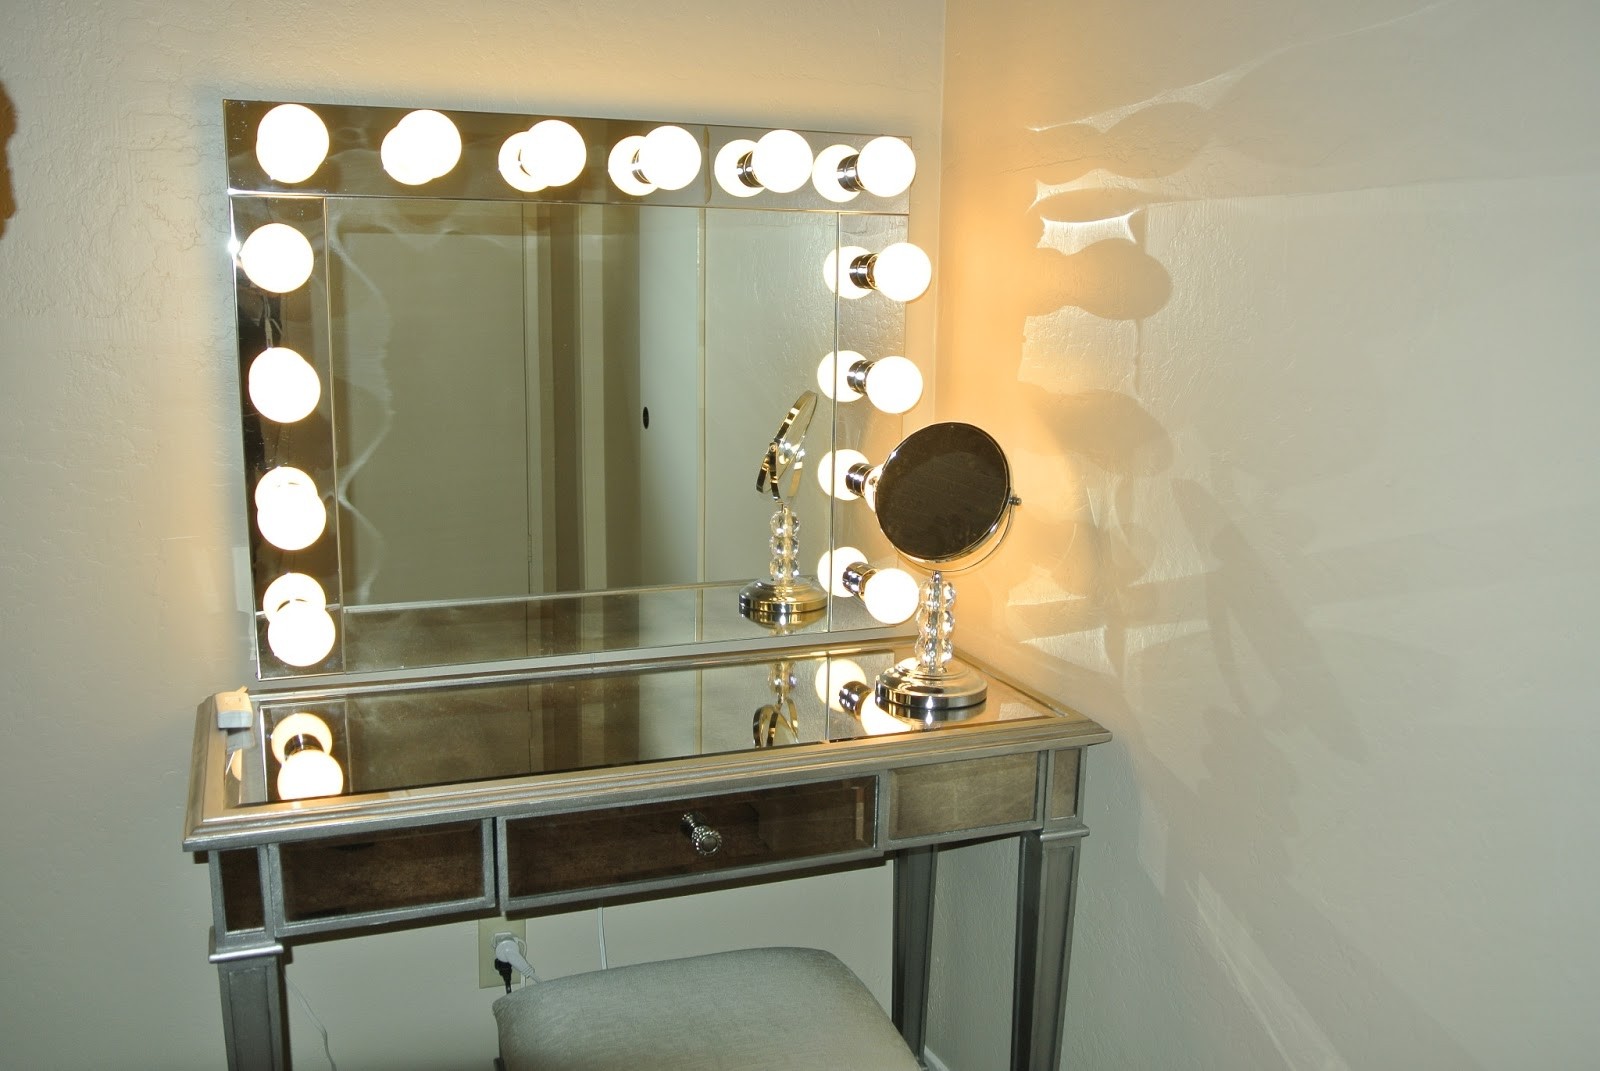 Dressing Table Tri-Fold Hollywood Mirror 3 Way Folding Design With LED Lights Beautify Vanity Beauty Makeup Mirror